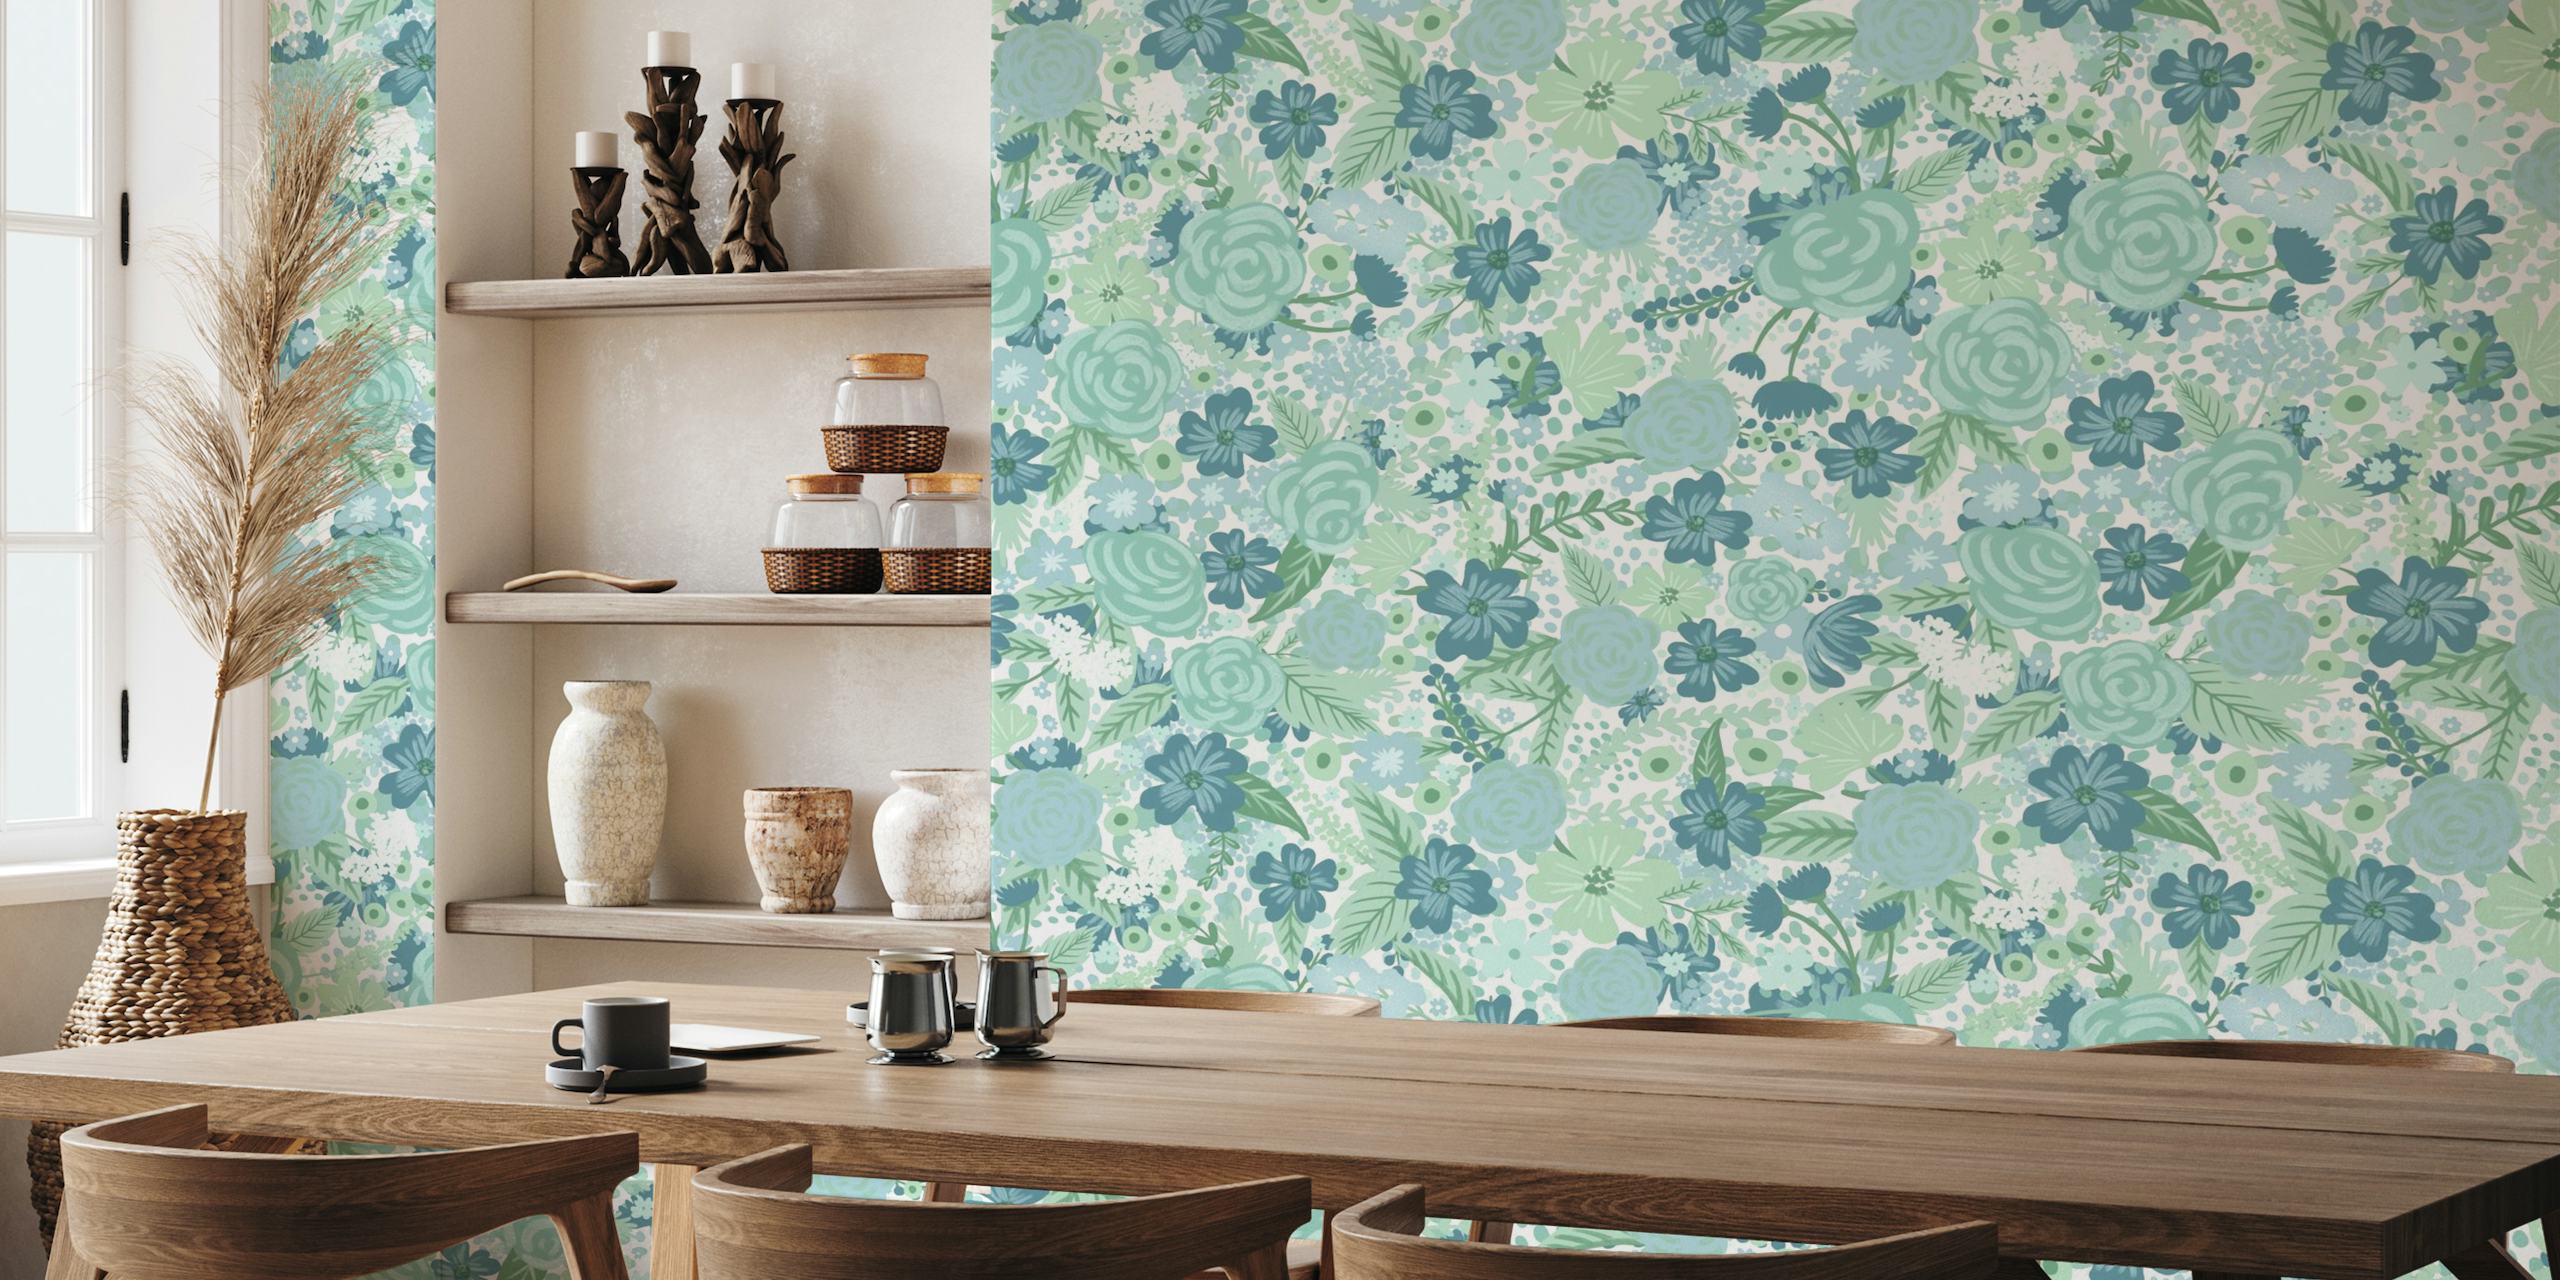 Ethereal blue and green floral wall mural pattern